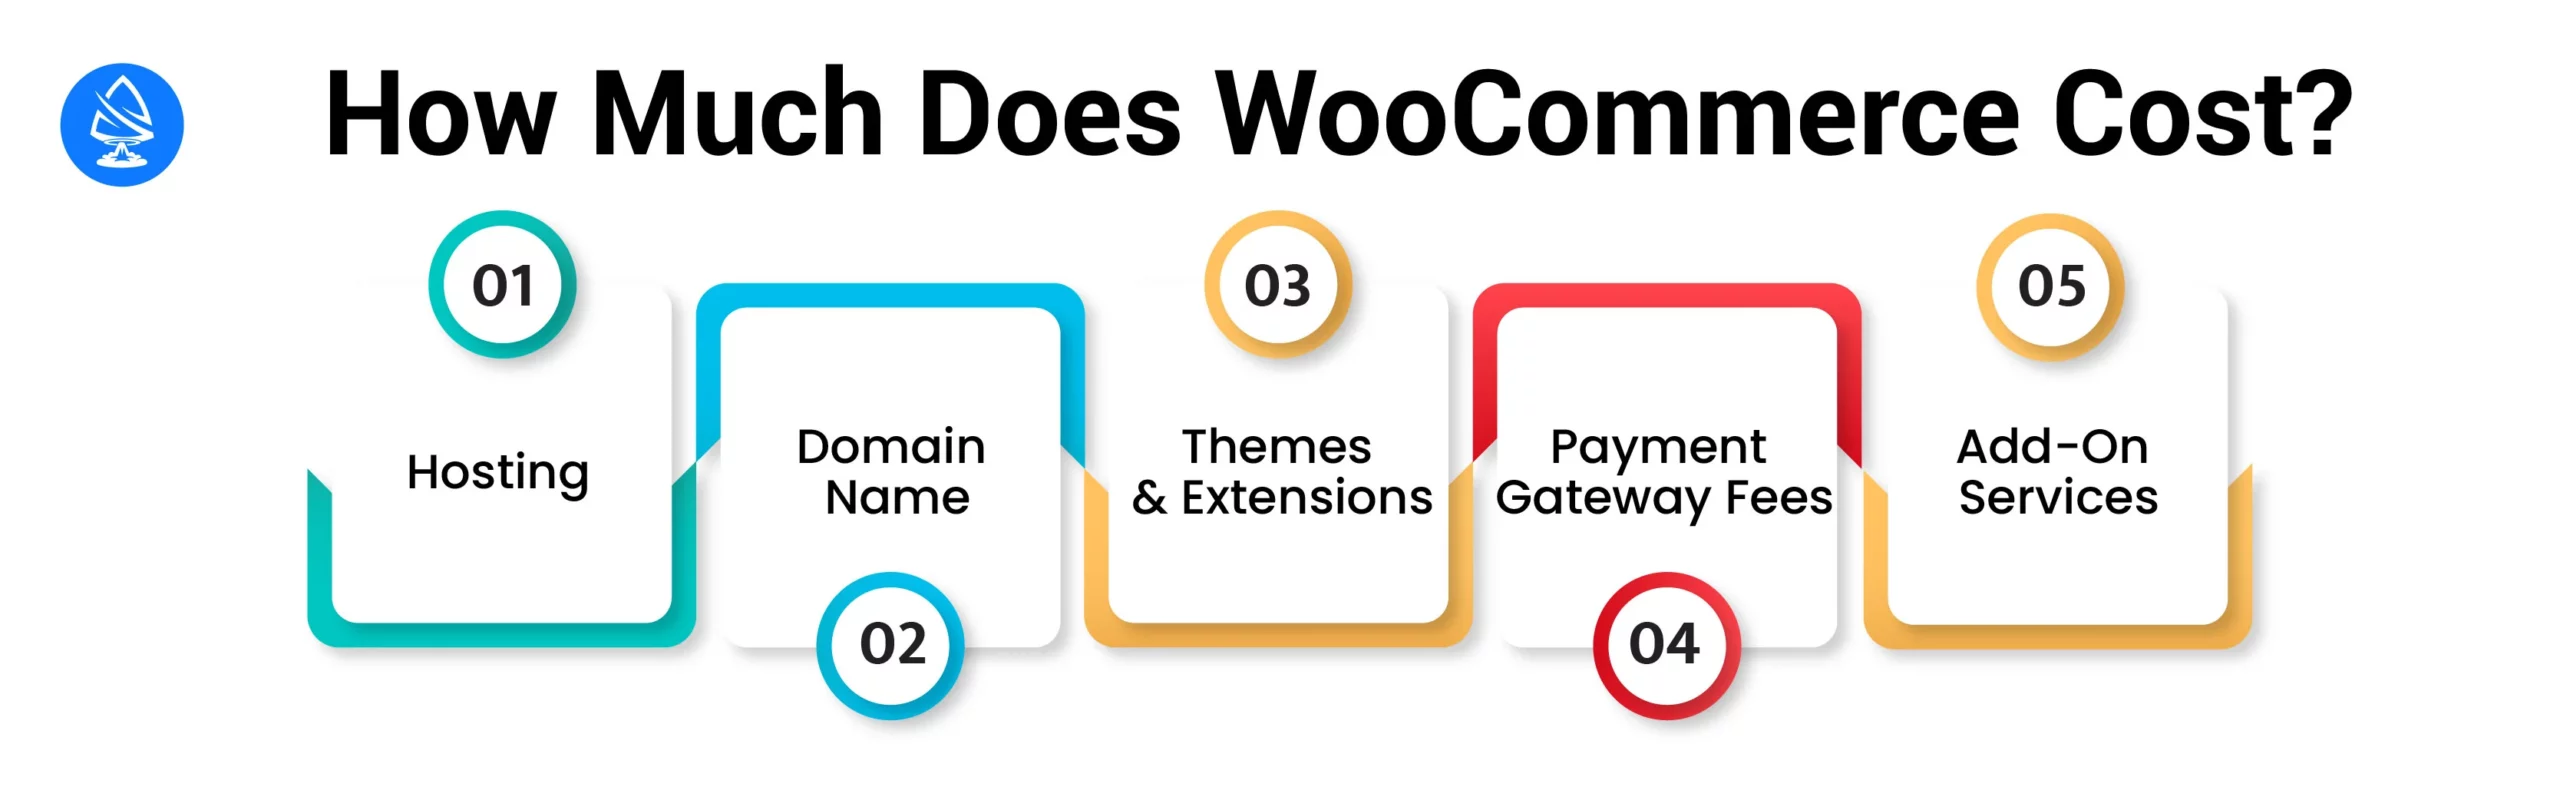 How Much Does Woo Commerce Cost?